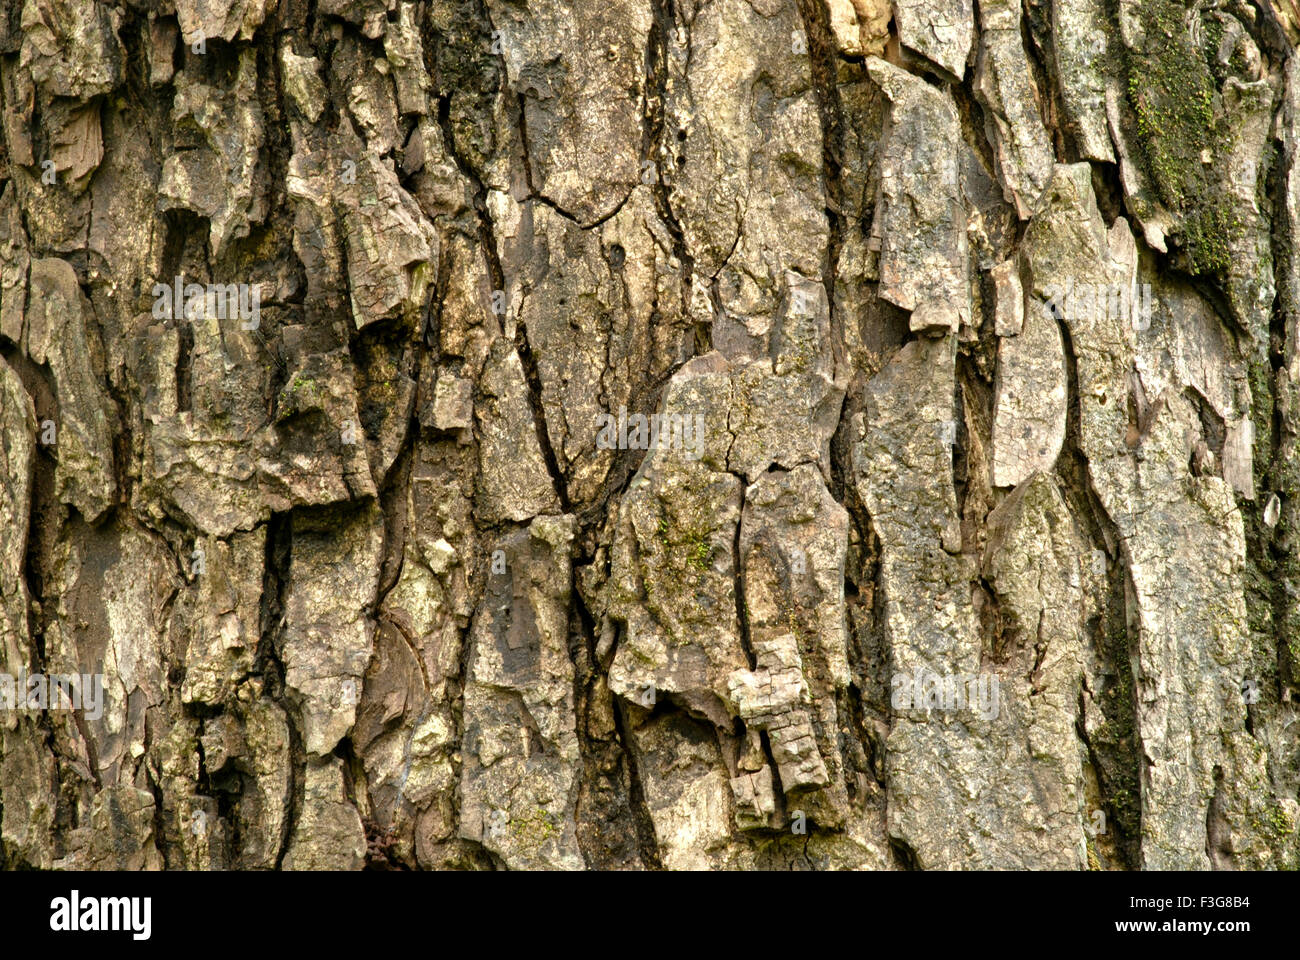 Natural surface tight close up of huge trunk of very old tree Stock Photo